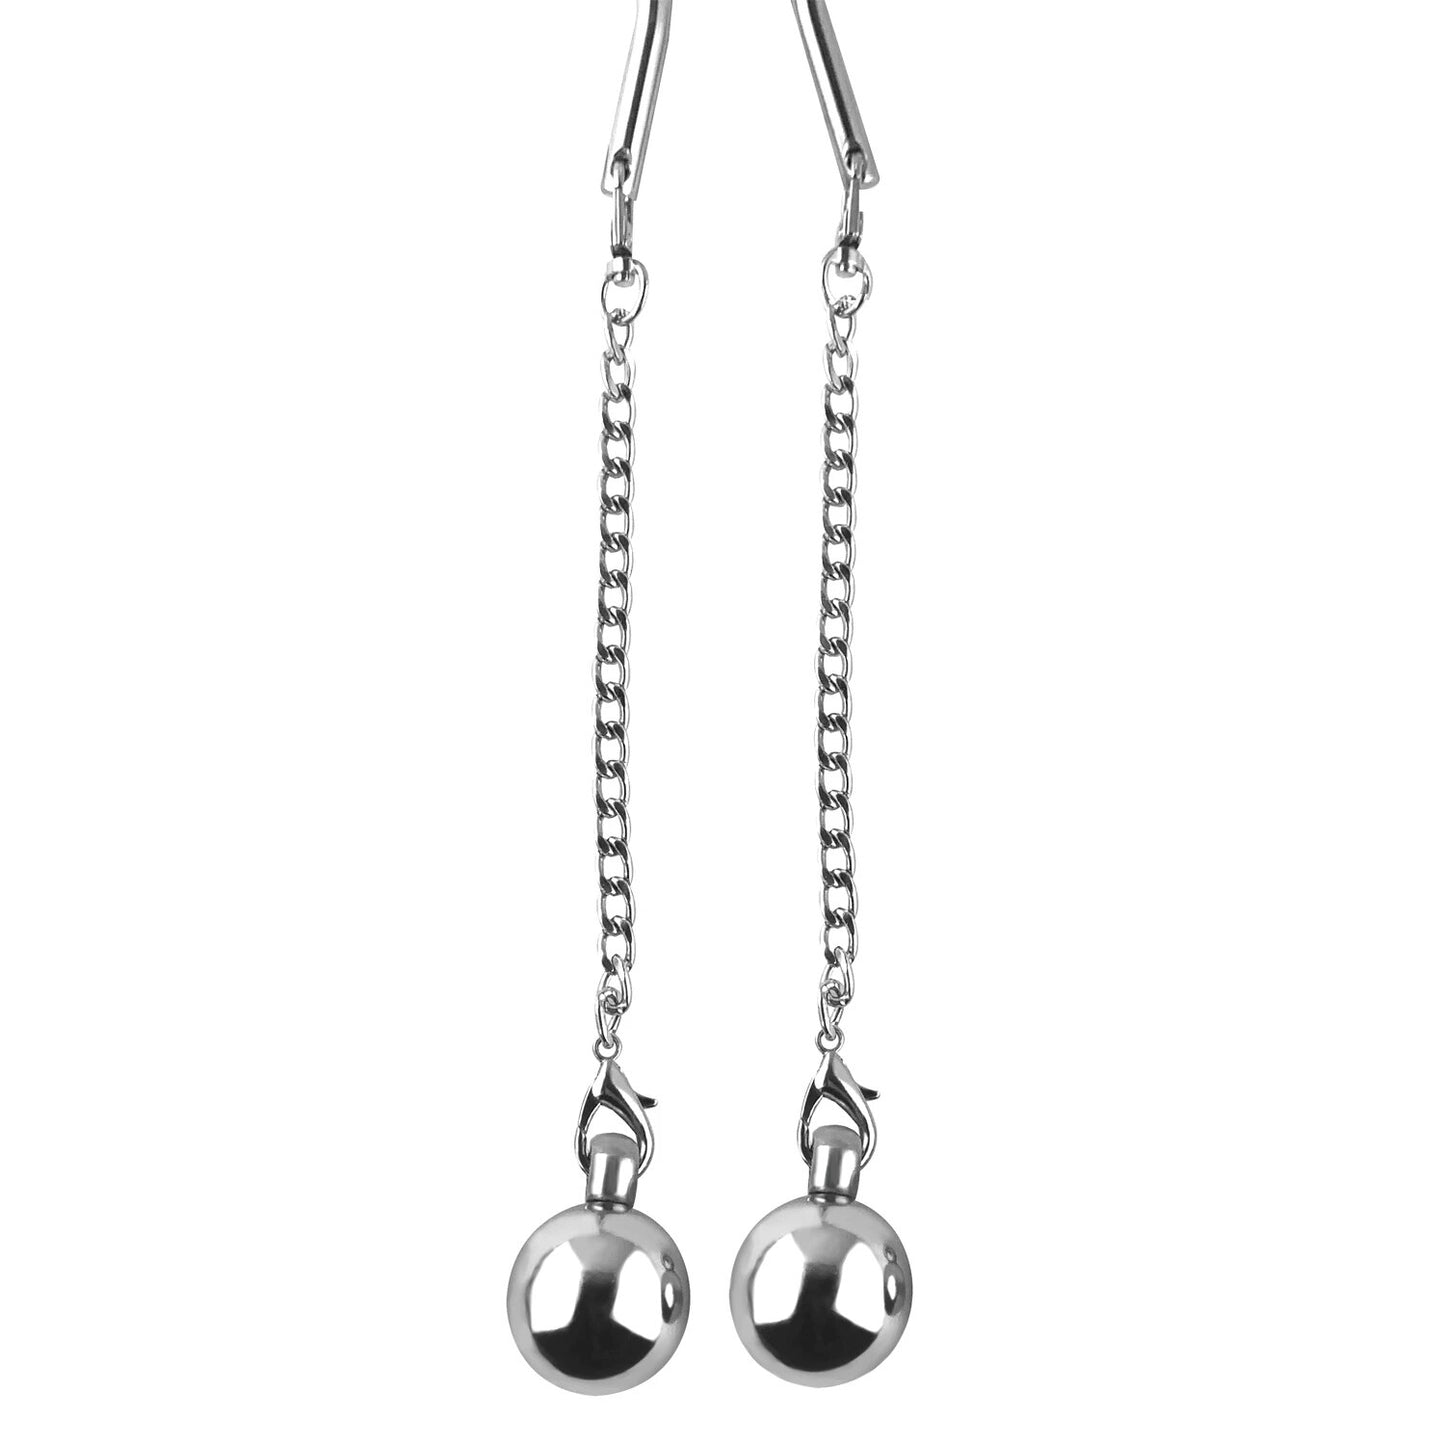 Stainless Steel Ball Stretcher Scrotum | Testicle Heavy Ball Weight Man Penis Cock Ring Enlargement Pull Exercise Male Toy - KeepMeLocked